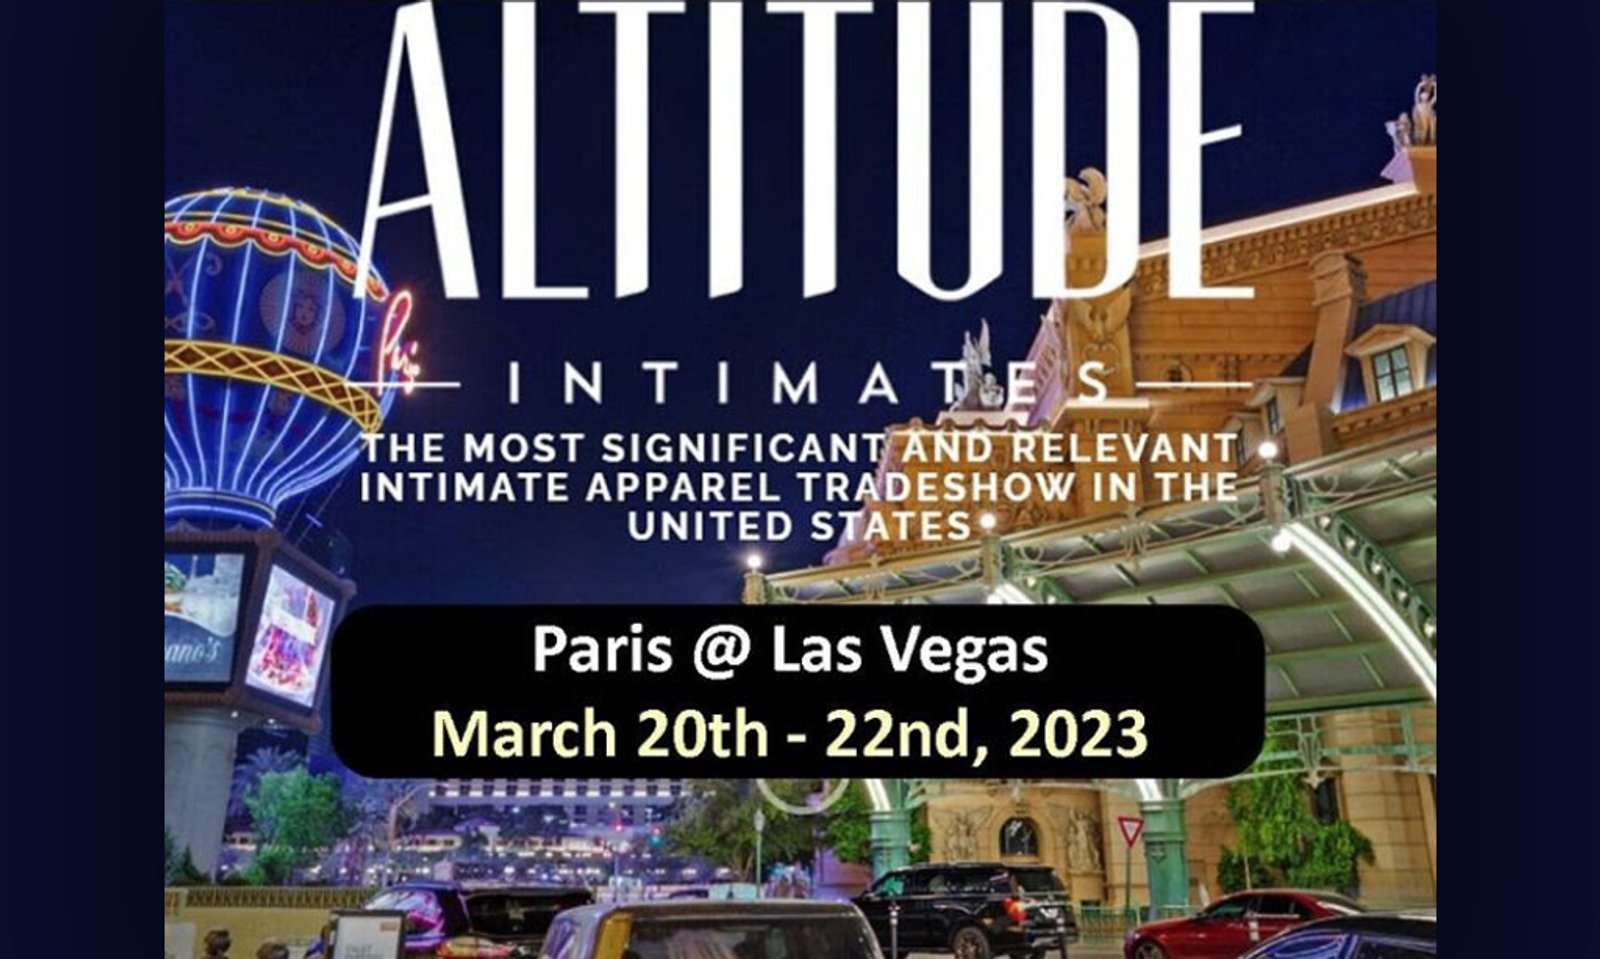 Wicked Sensual Care to Exhibit at 2023 Altitude Intimates Show